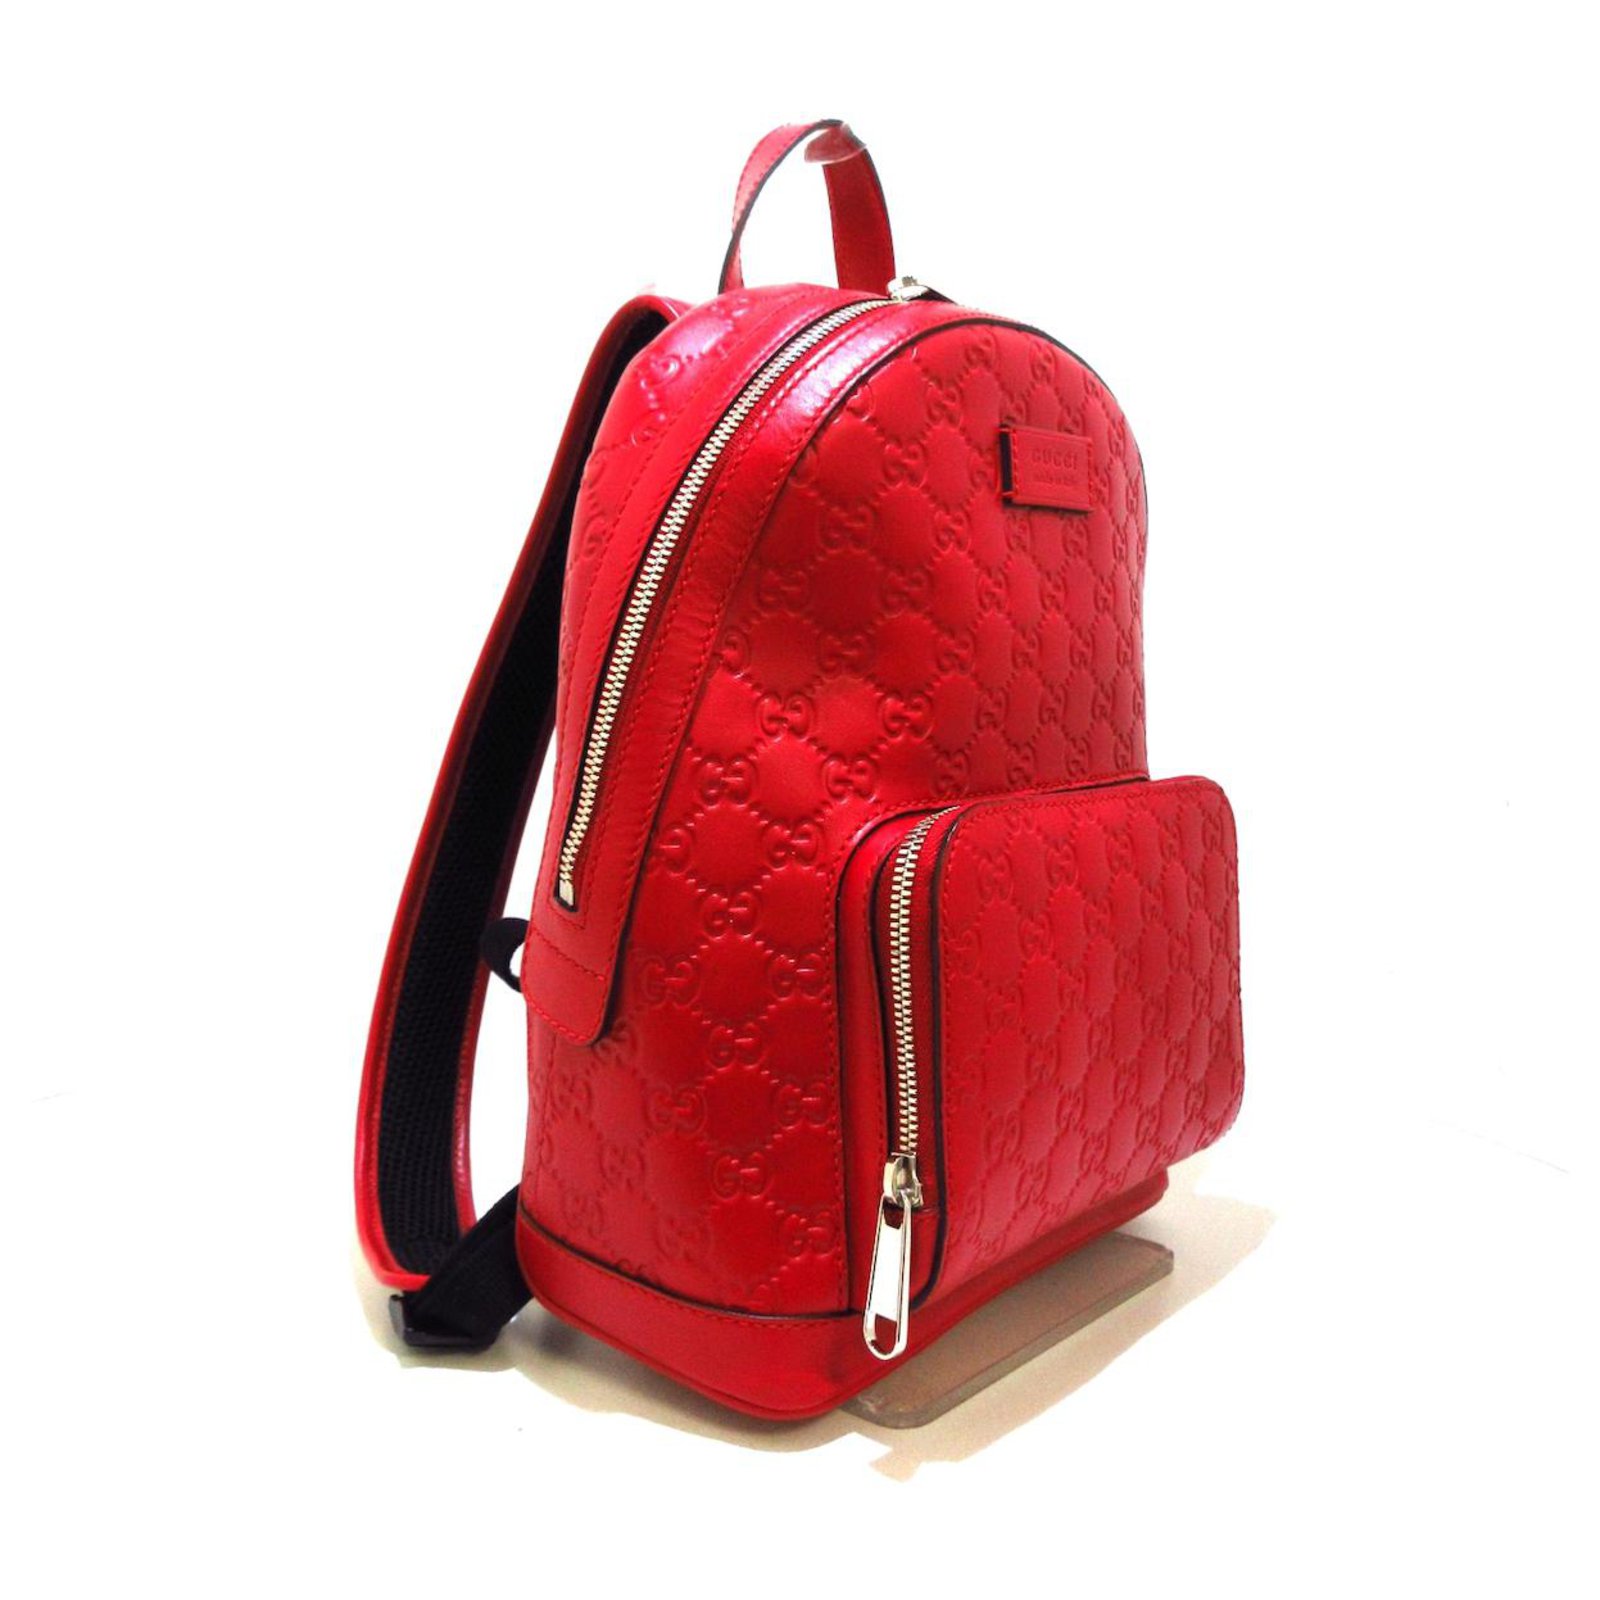 Gucci Unisex Red Nylon Backpack Travel Bag 510336 6523–